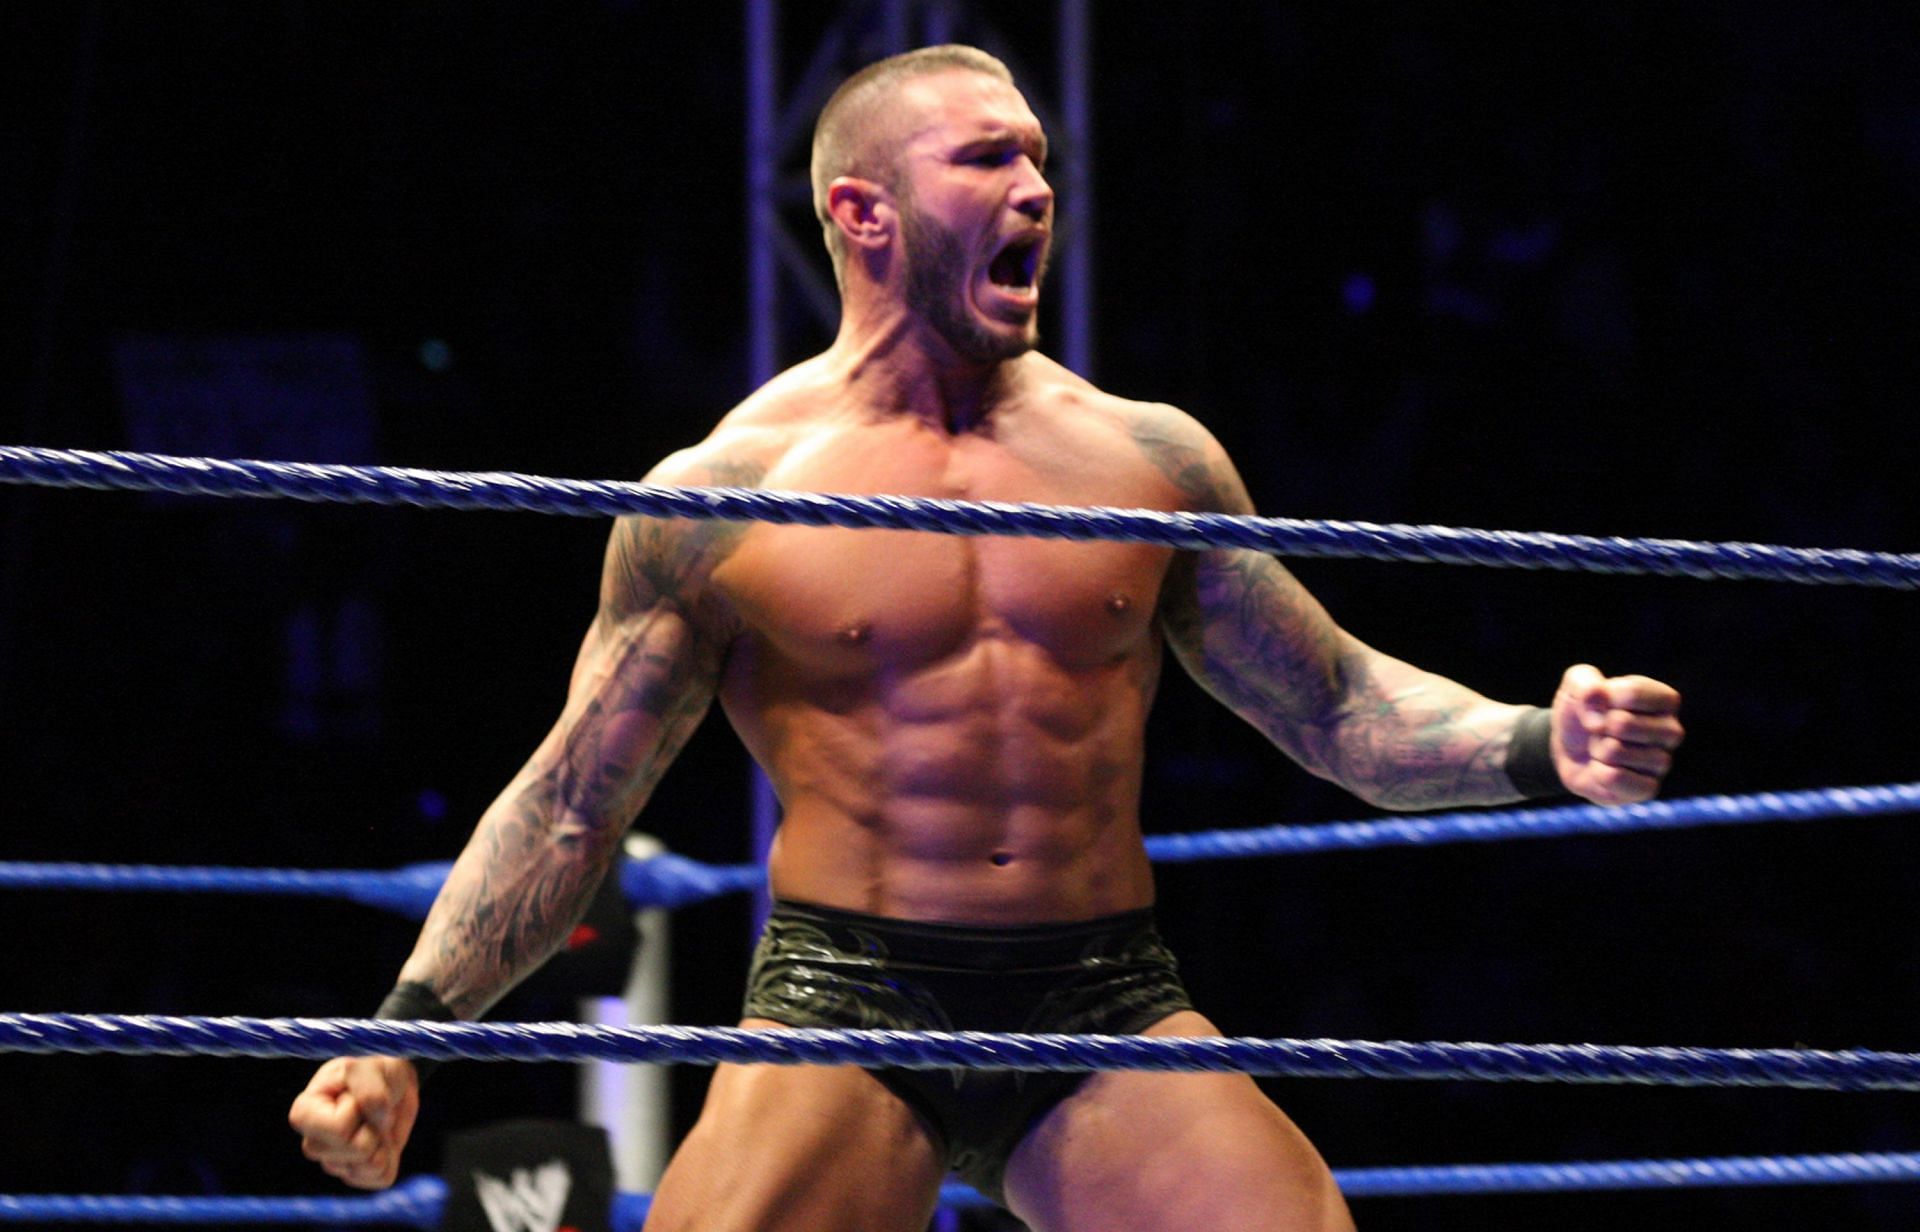 Two decades in, Randy Orton has done it all in WWE. Presence, in-ring quality, promos, he has everything.